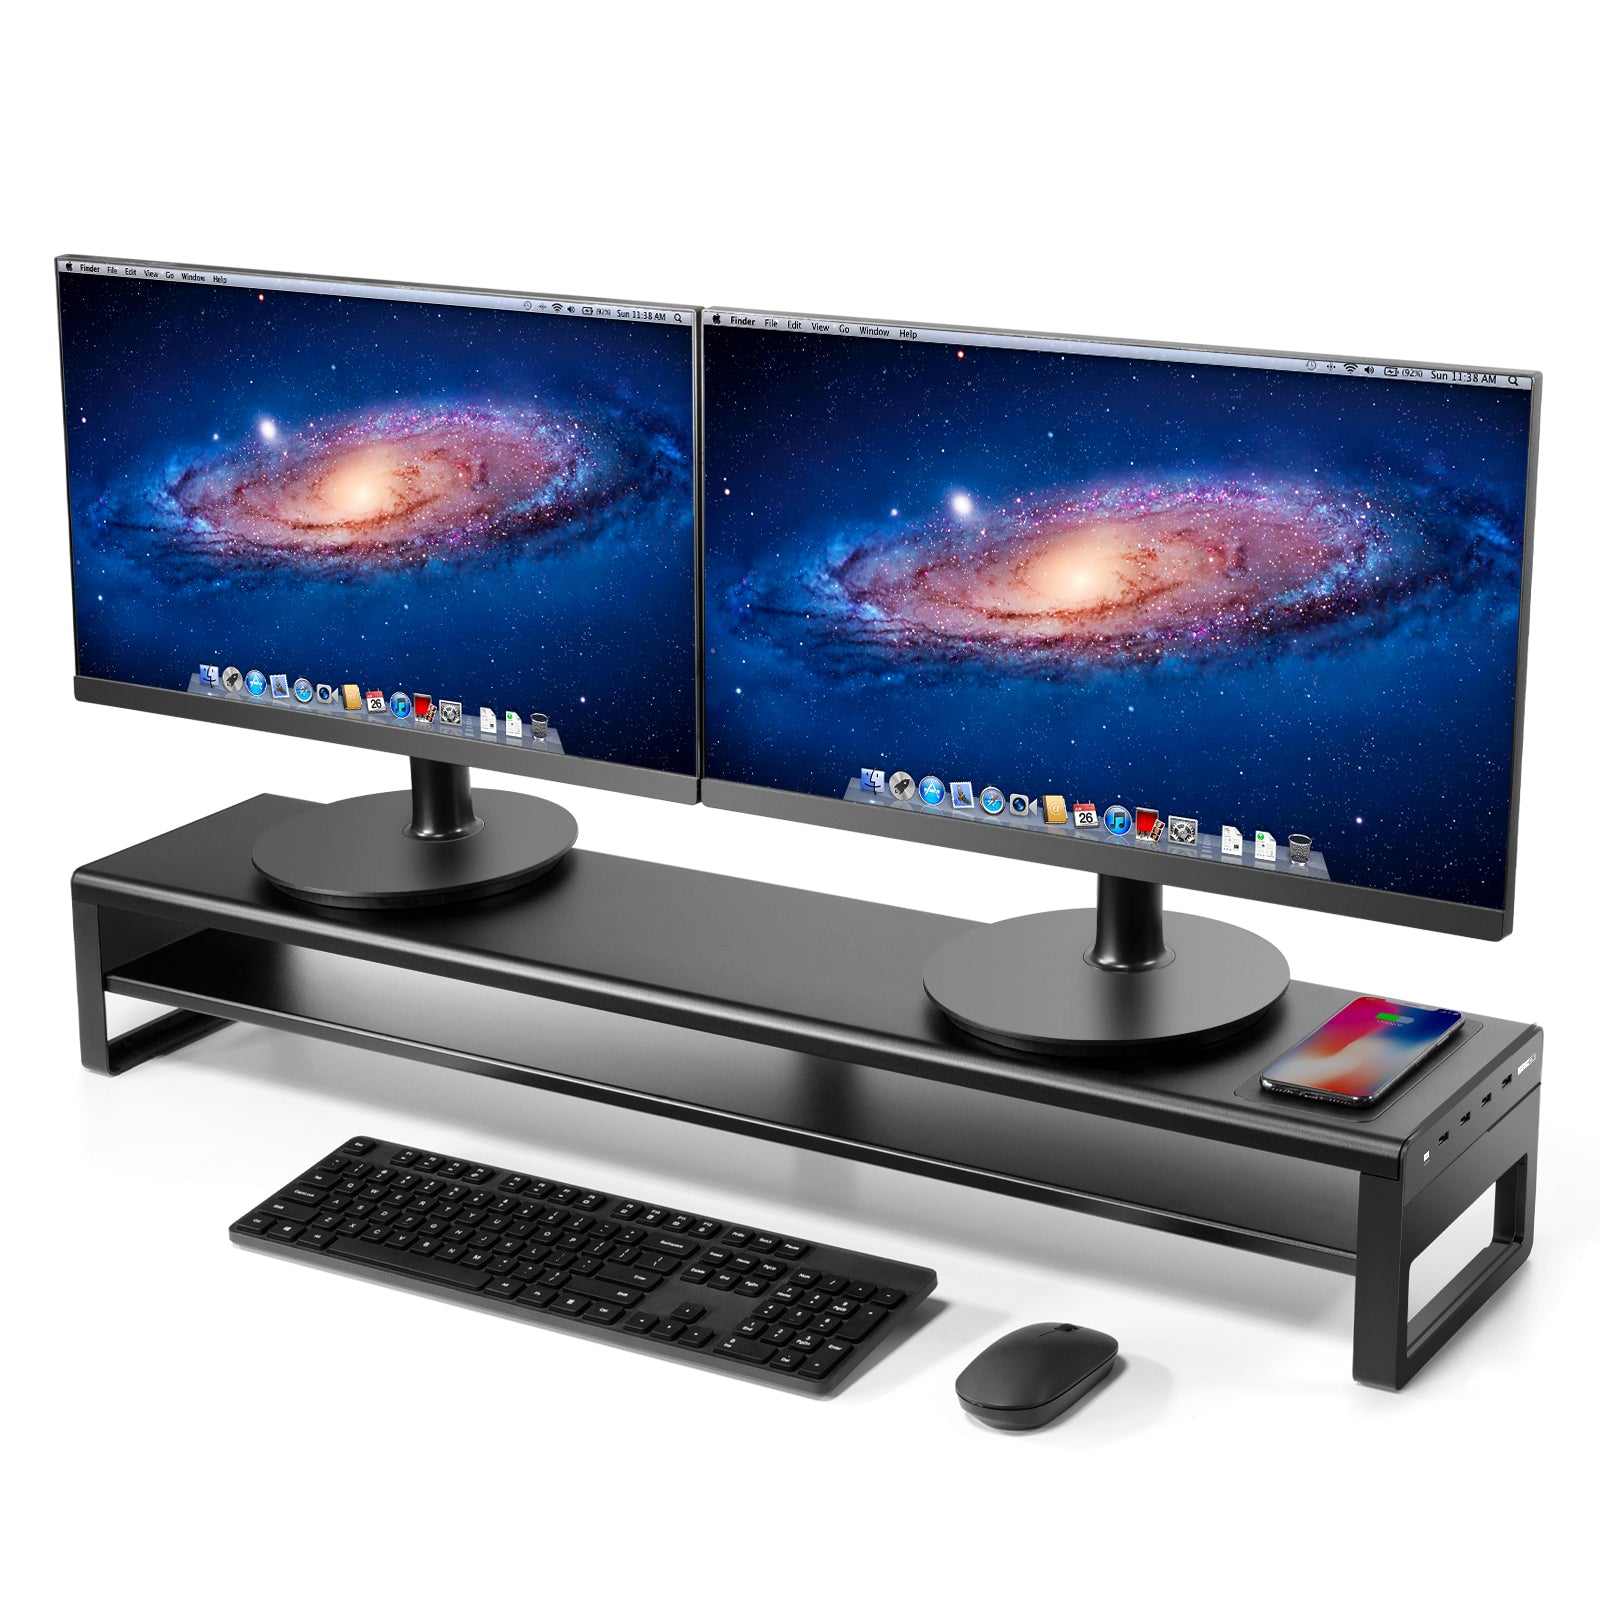 Vaydeer Introduces New Monitor/Laptop Stand to Make Working with Computers More Convenient